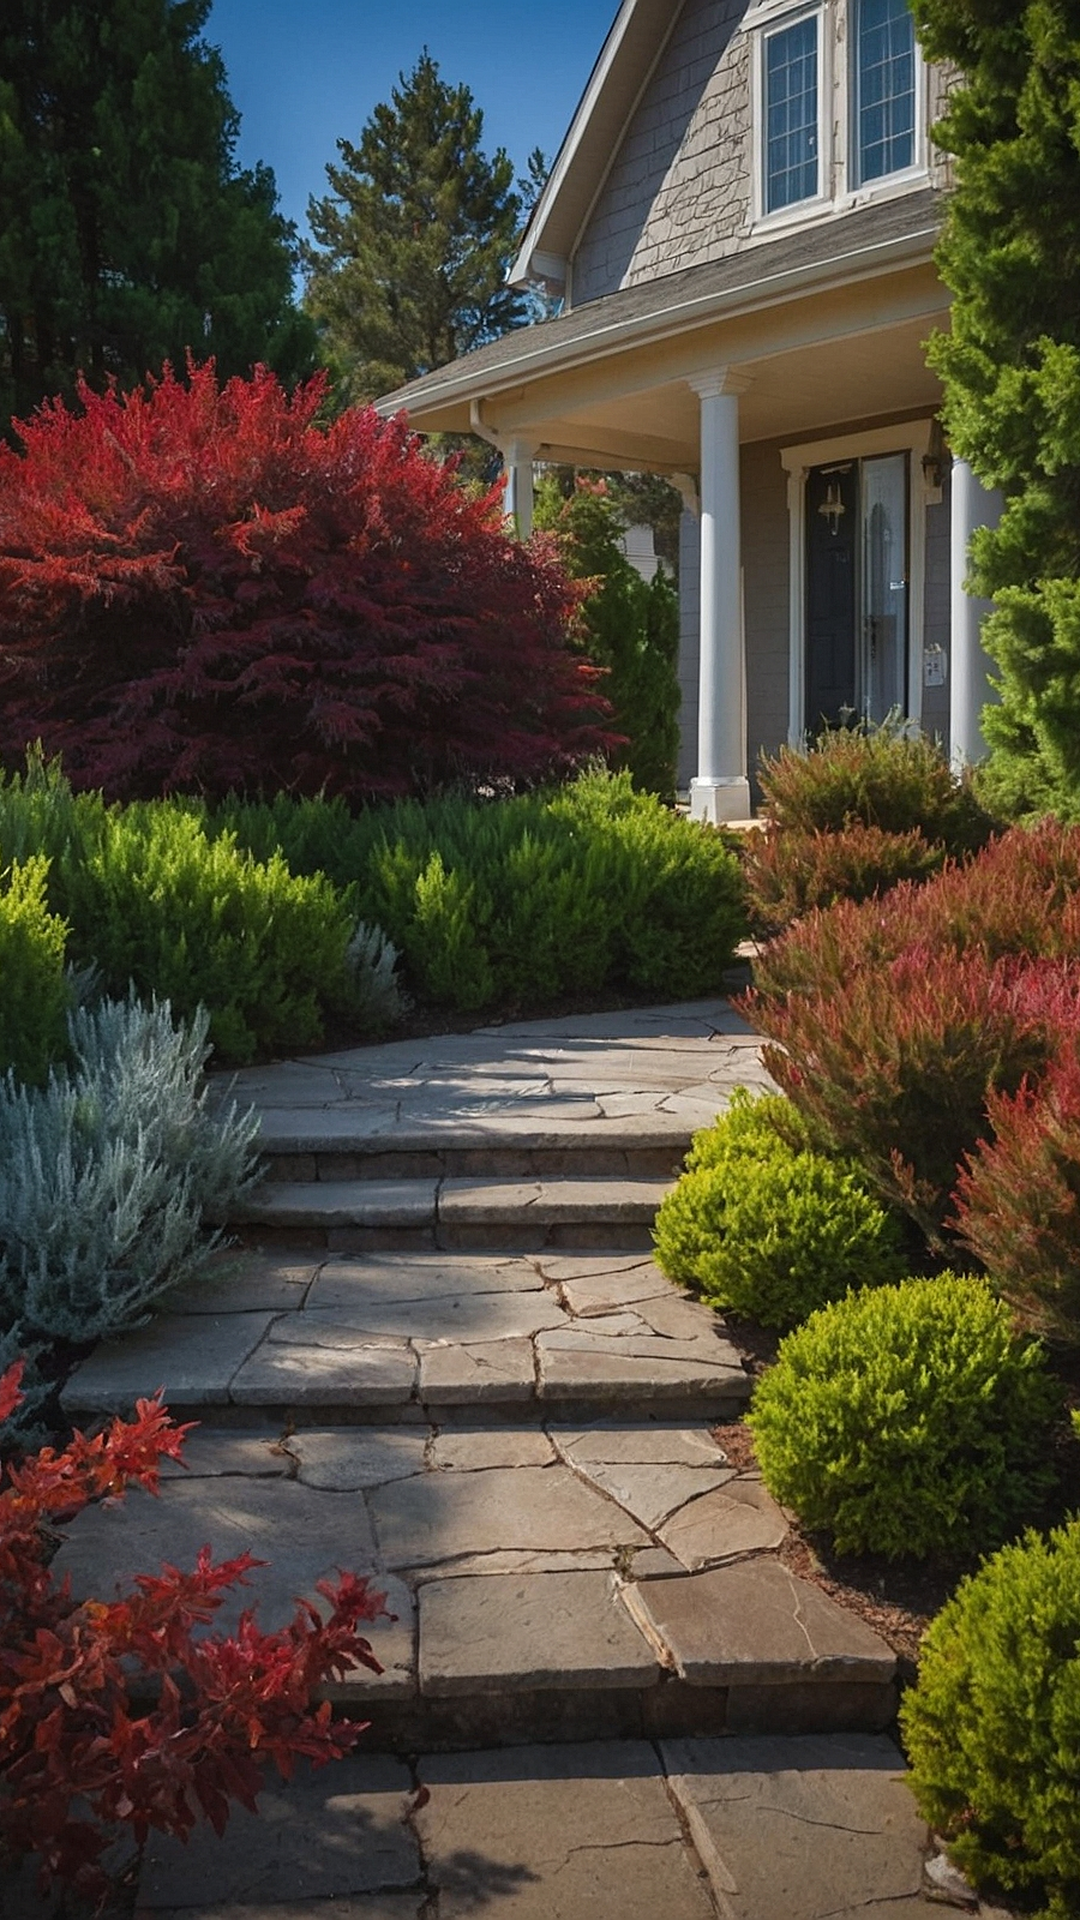 Year-Round Greenery: Evergreen Bushes for Constant Curb Appeal